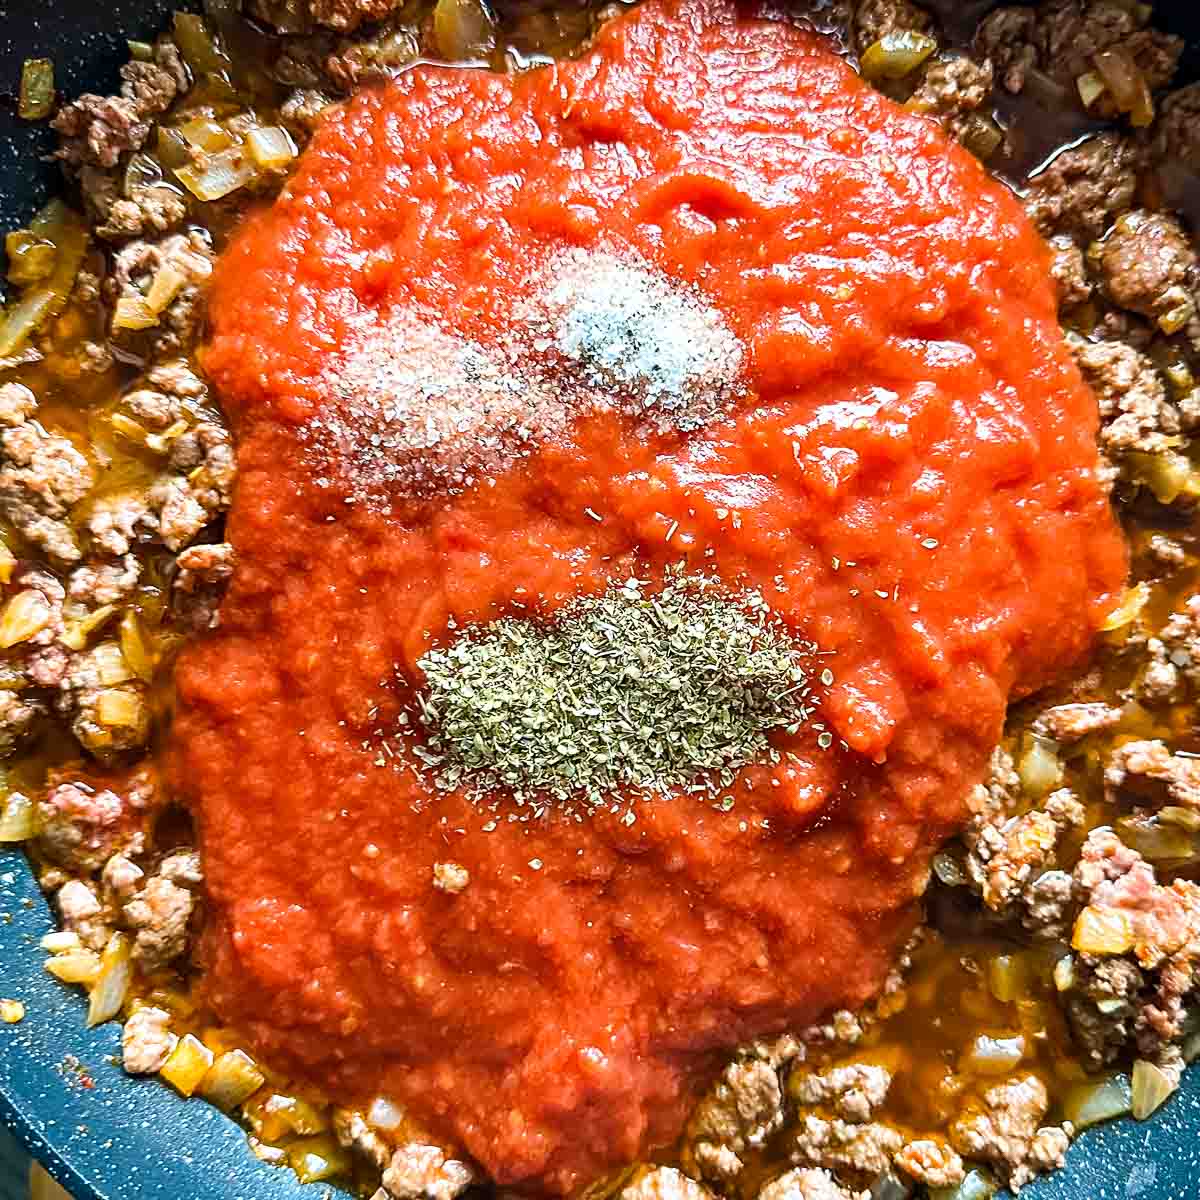 Crushed tomatoes, salt, and Italian spices are added to the lamb mixture in the frying pan.